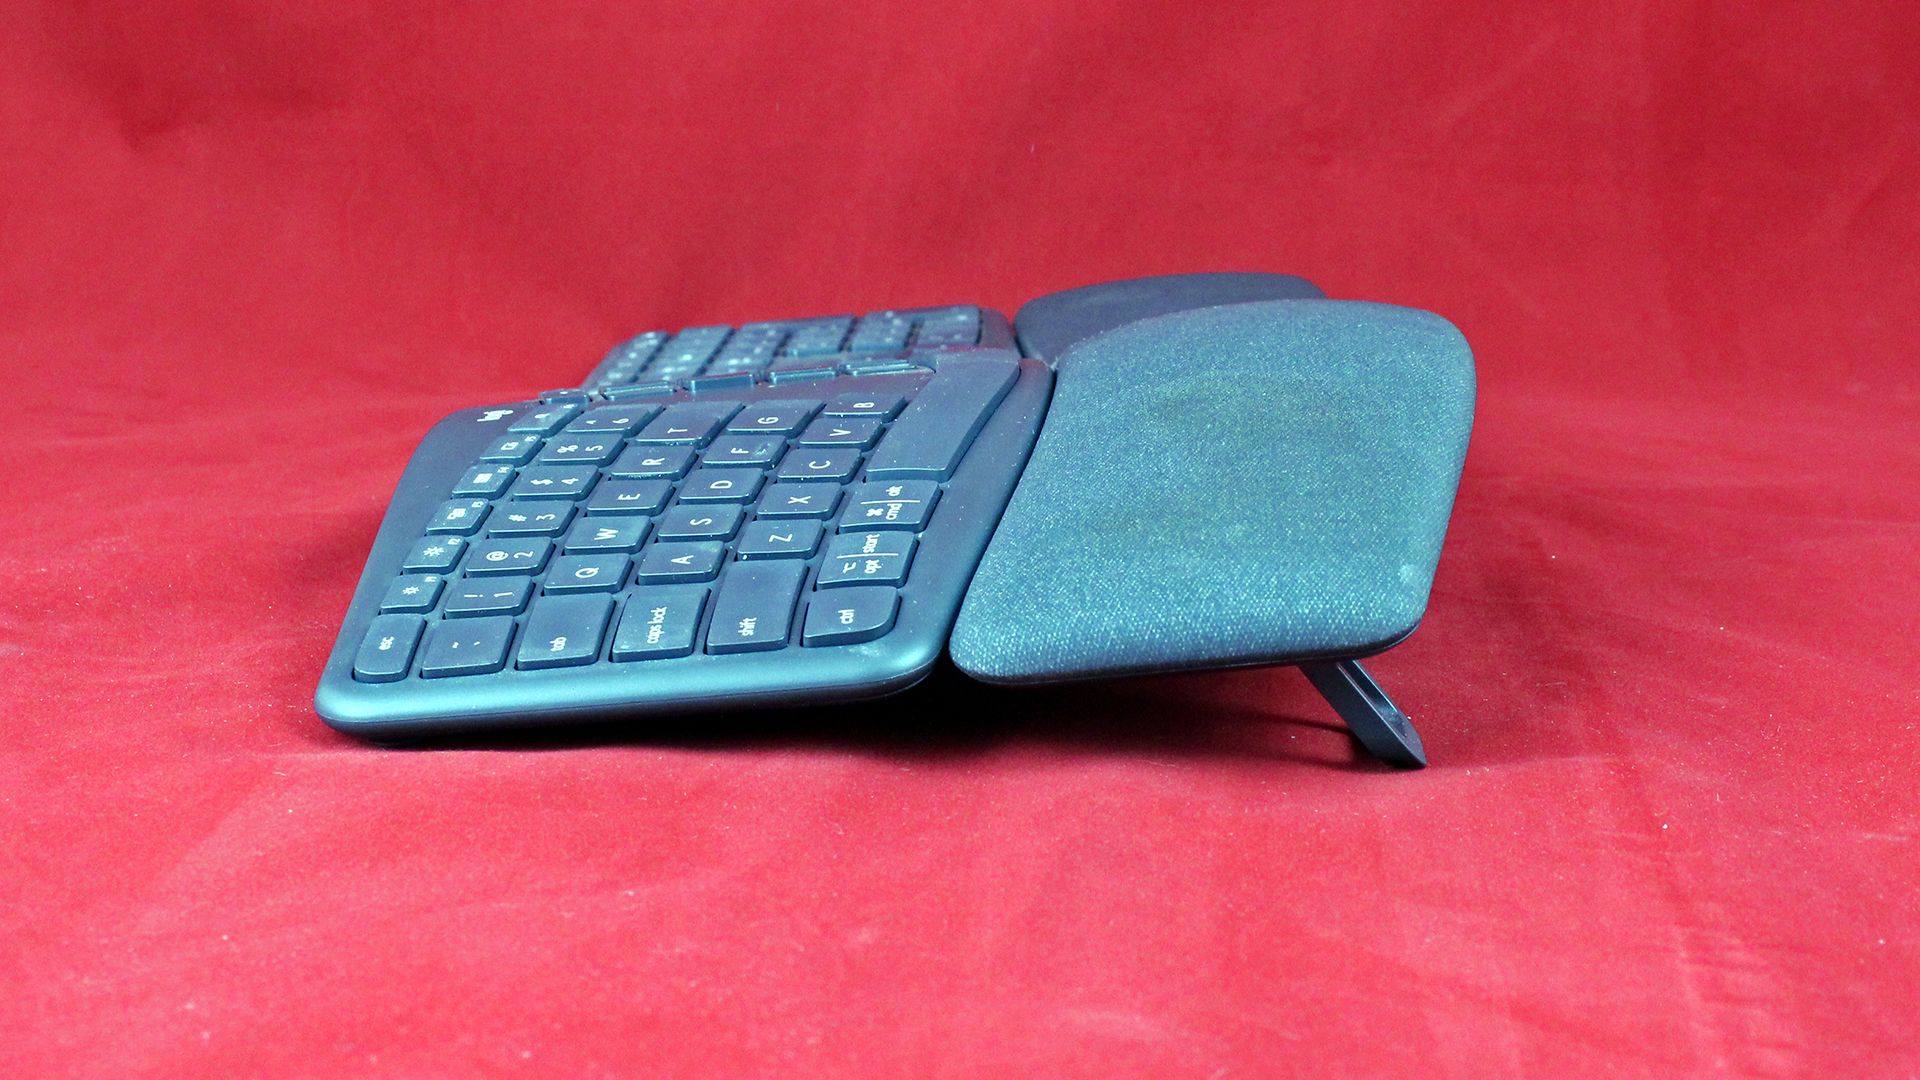 A side view of the ERGO keyboard, liften to -11 degrees.